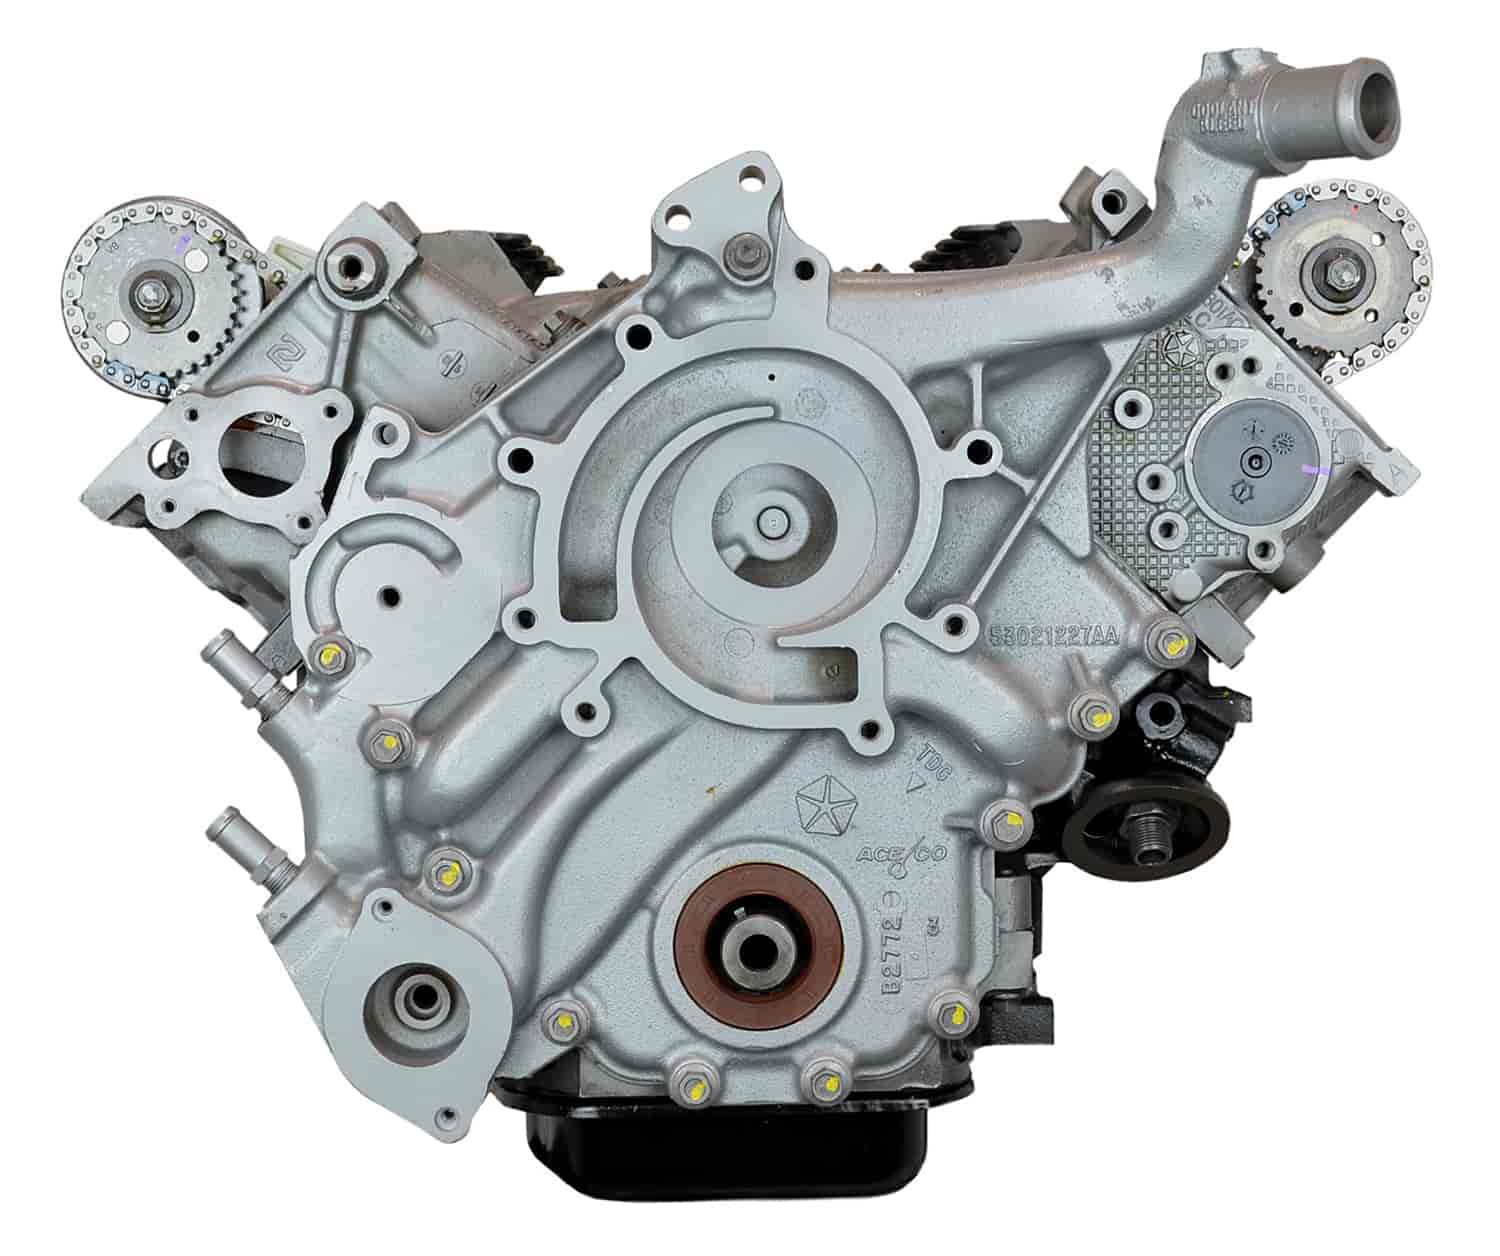 Remanufactured Crate Engine for 2004-2008 Dodge Ram Truck